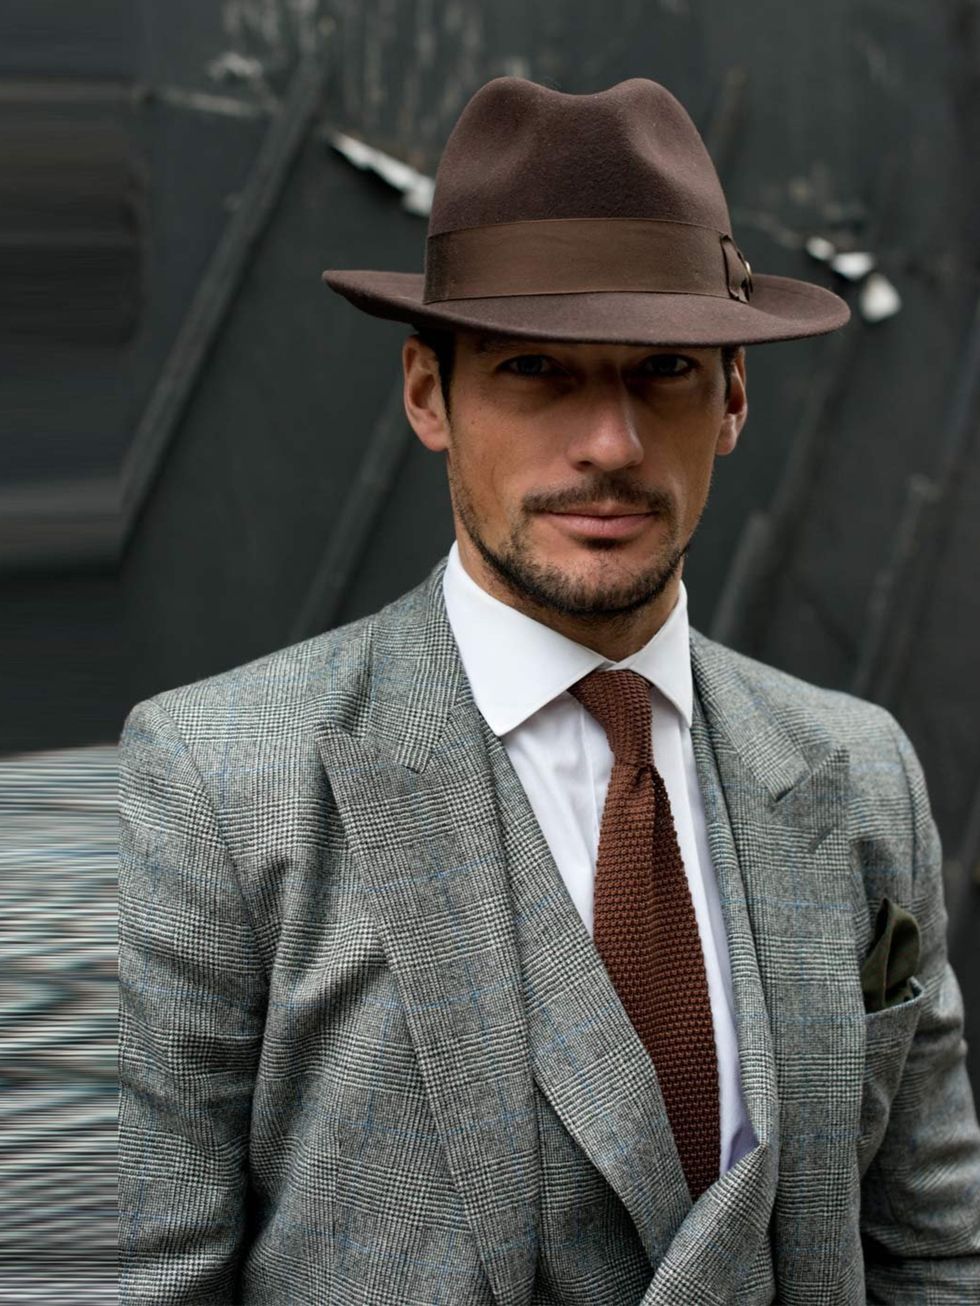 <p>David Gandy, Model. Neil Fennel October House Tailor suit, Thomas Pink shirt, Goorin Brothers hat, Reiss tie.</p>